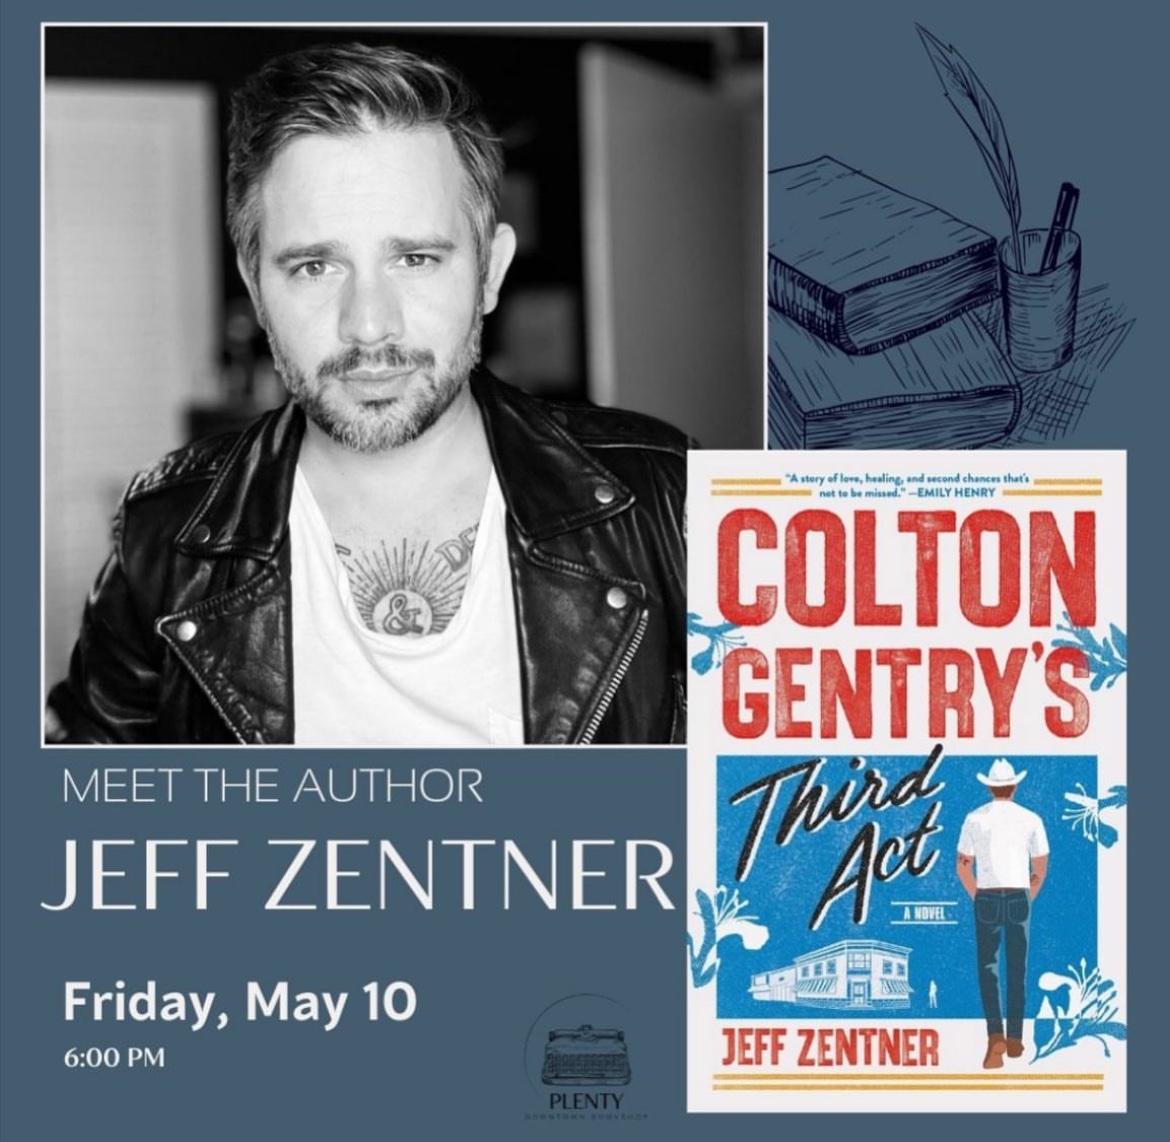 Hey Tennessee folks! I’ll be at Plenty Bookshop in Cookeville, Tennessee this Friday at 6:00! Come see me! Honestly, this bookstore is worth roadtripping to!